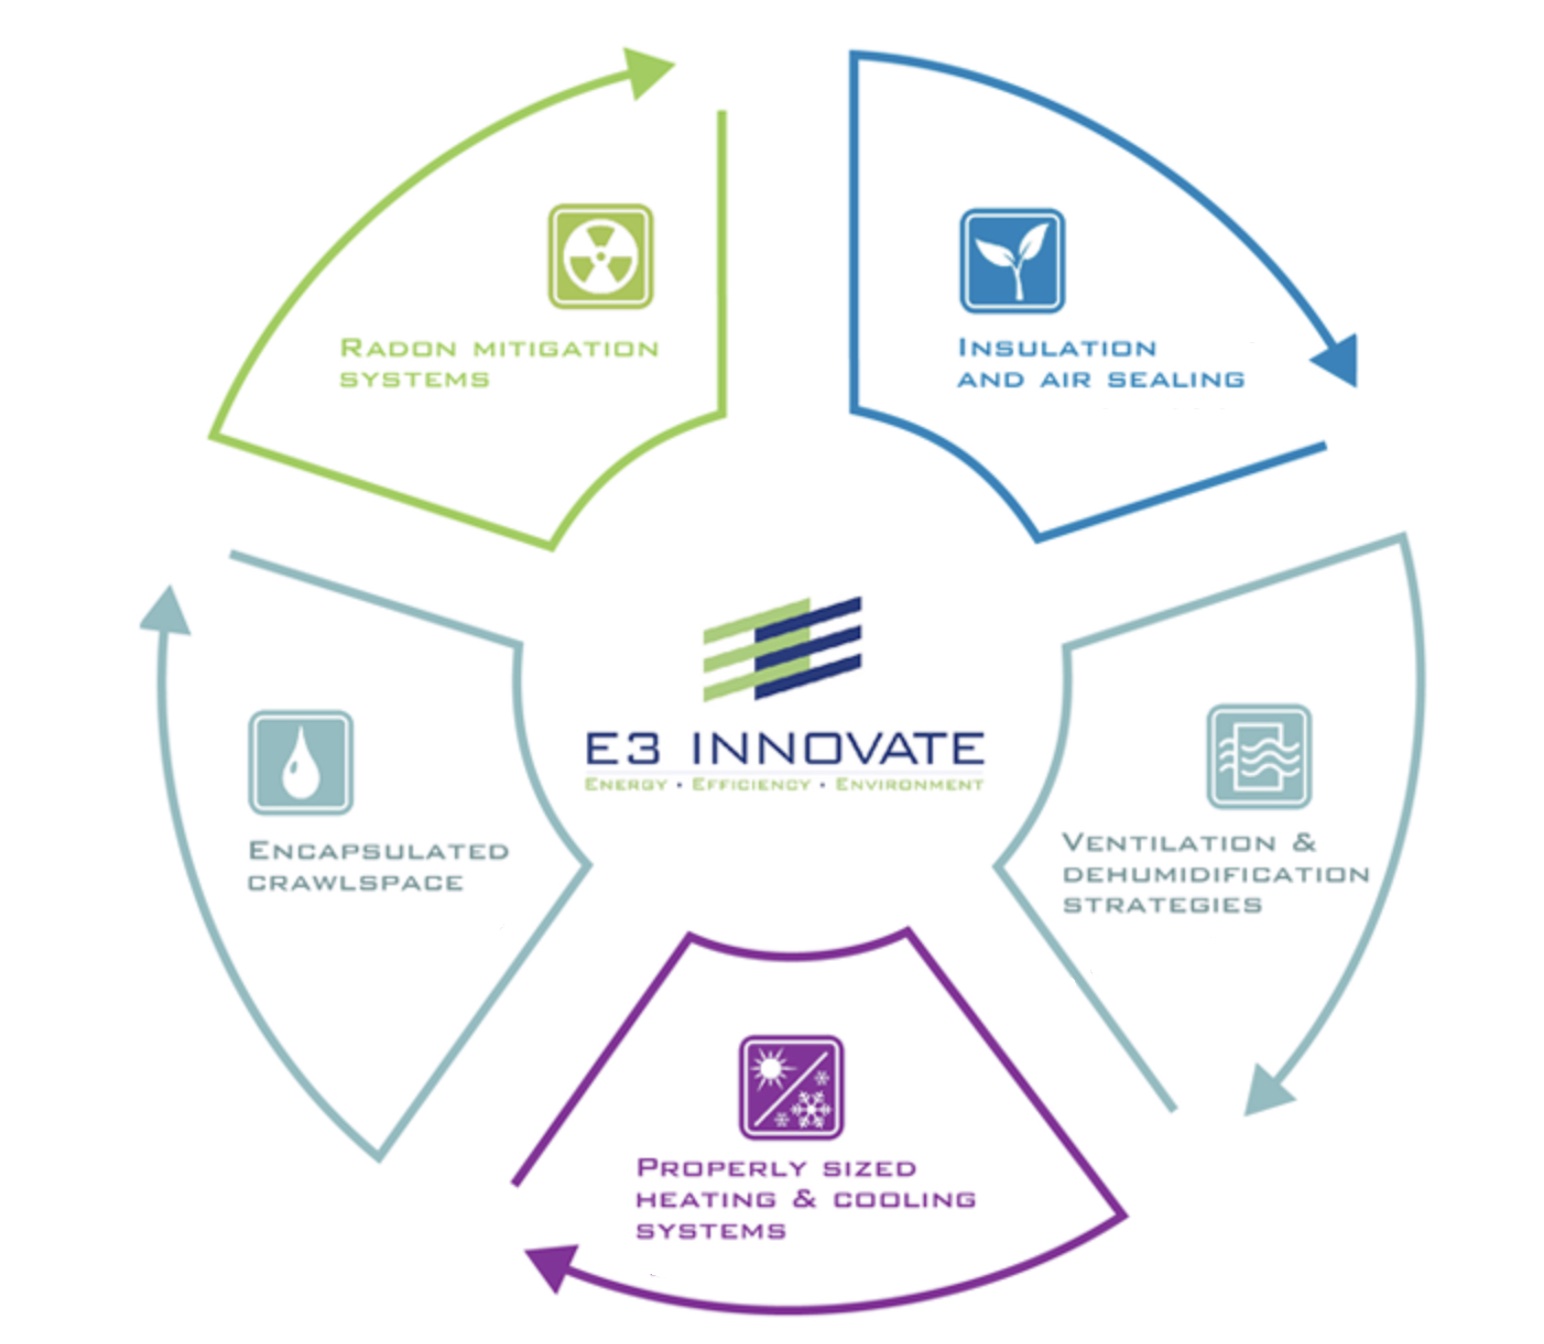 E3 INNOVATE's integrated approach 